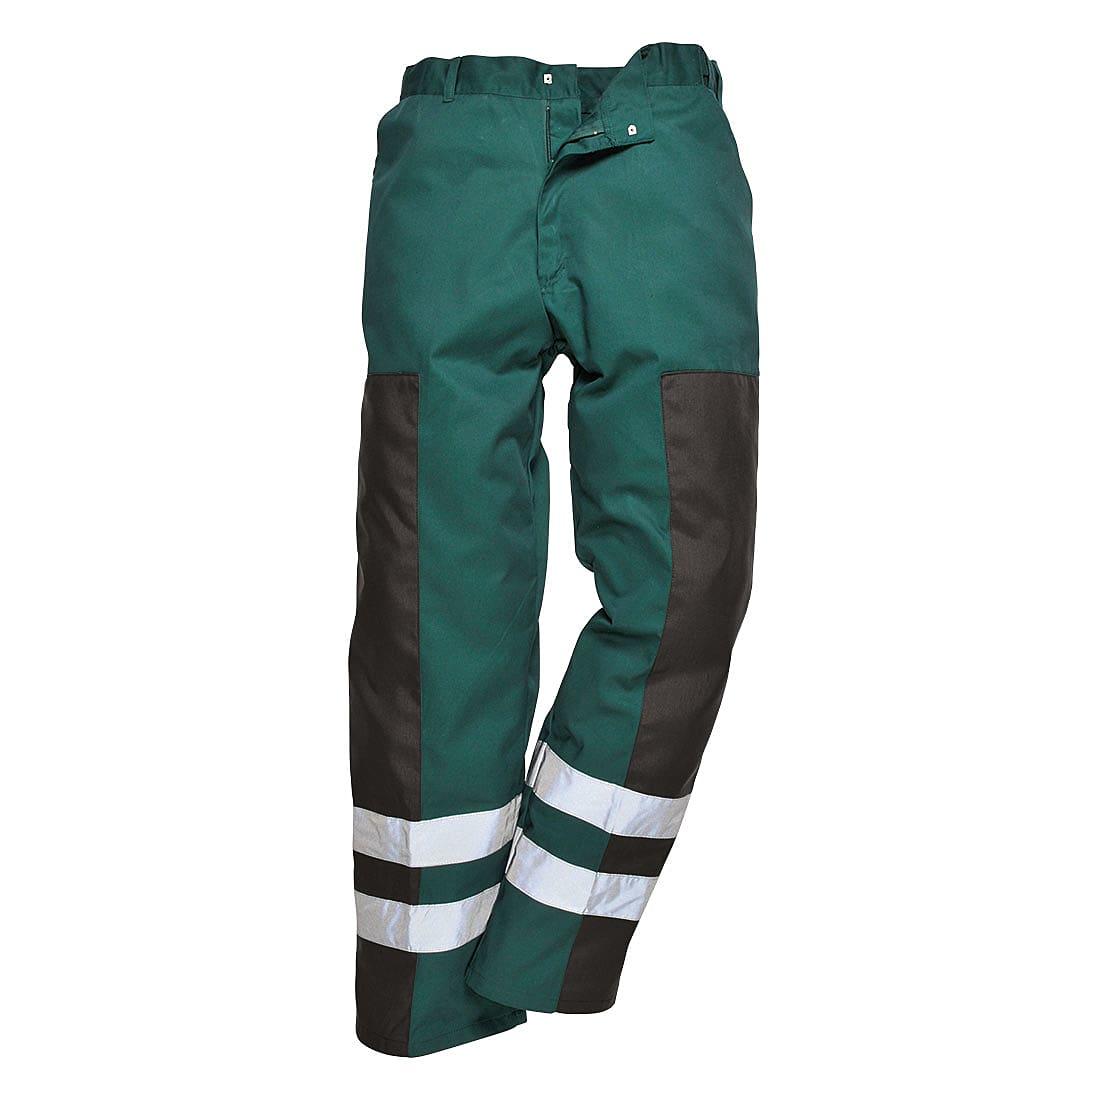 Portwest Ballistic Trousers in Bottle Green (Product Code: S918)